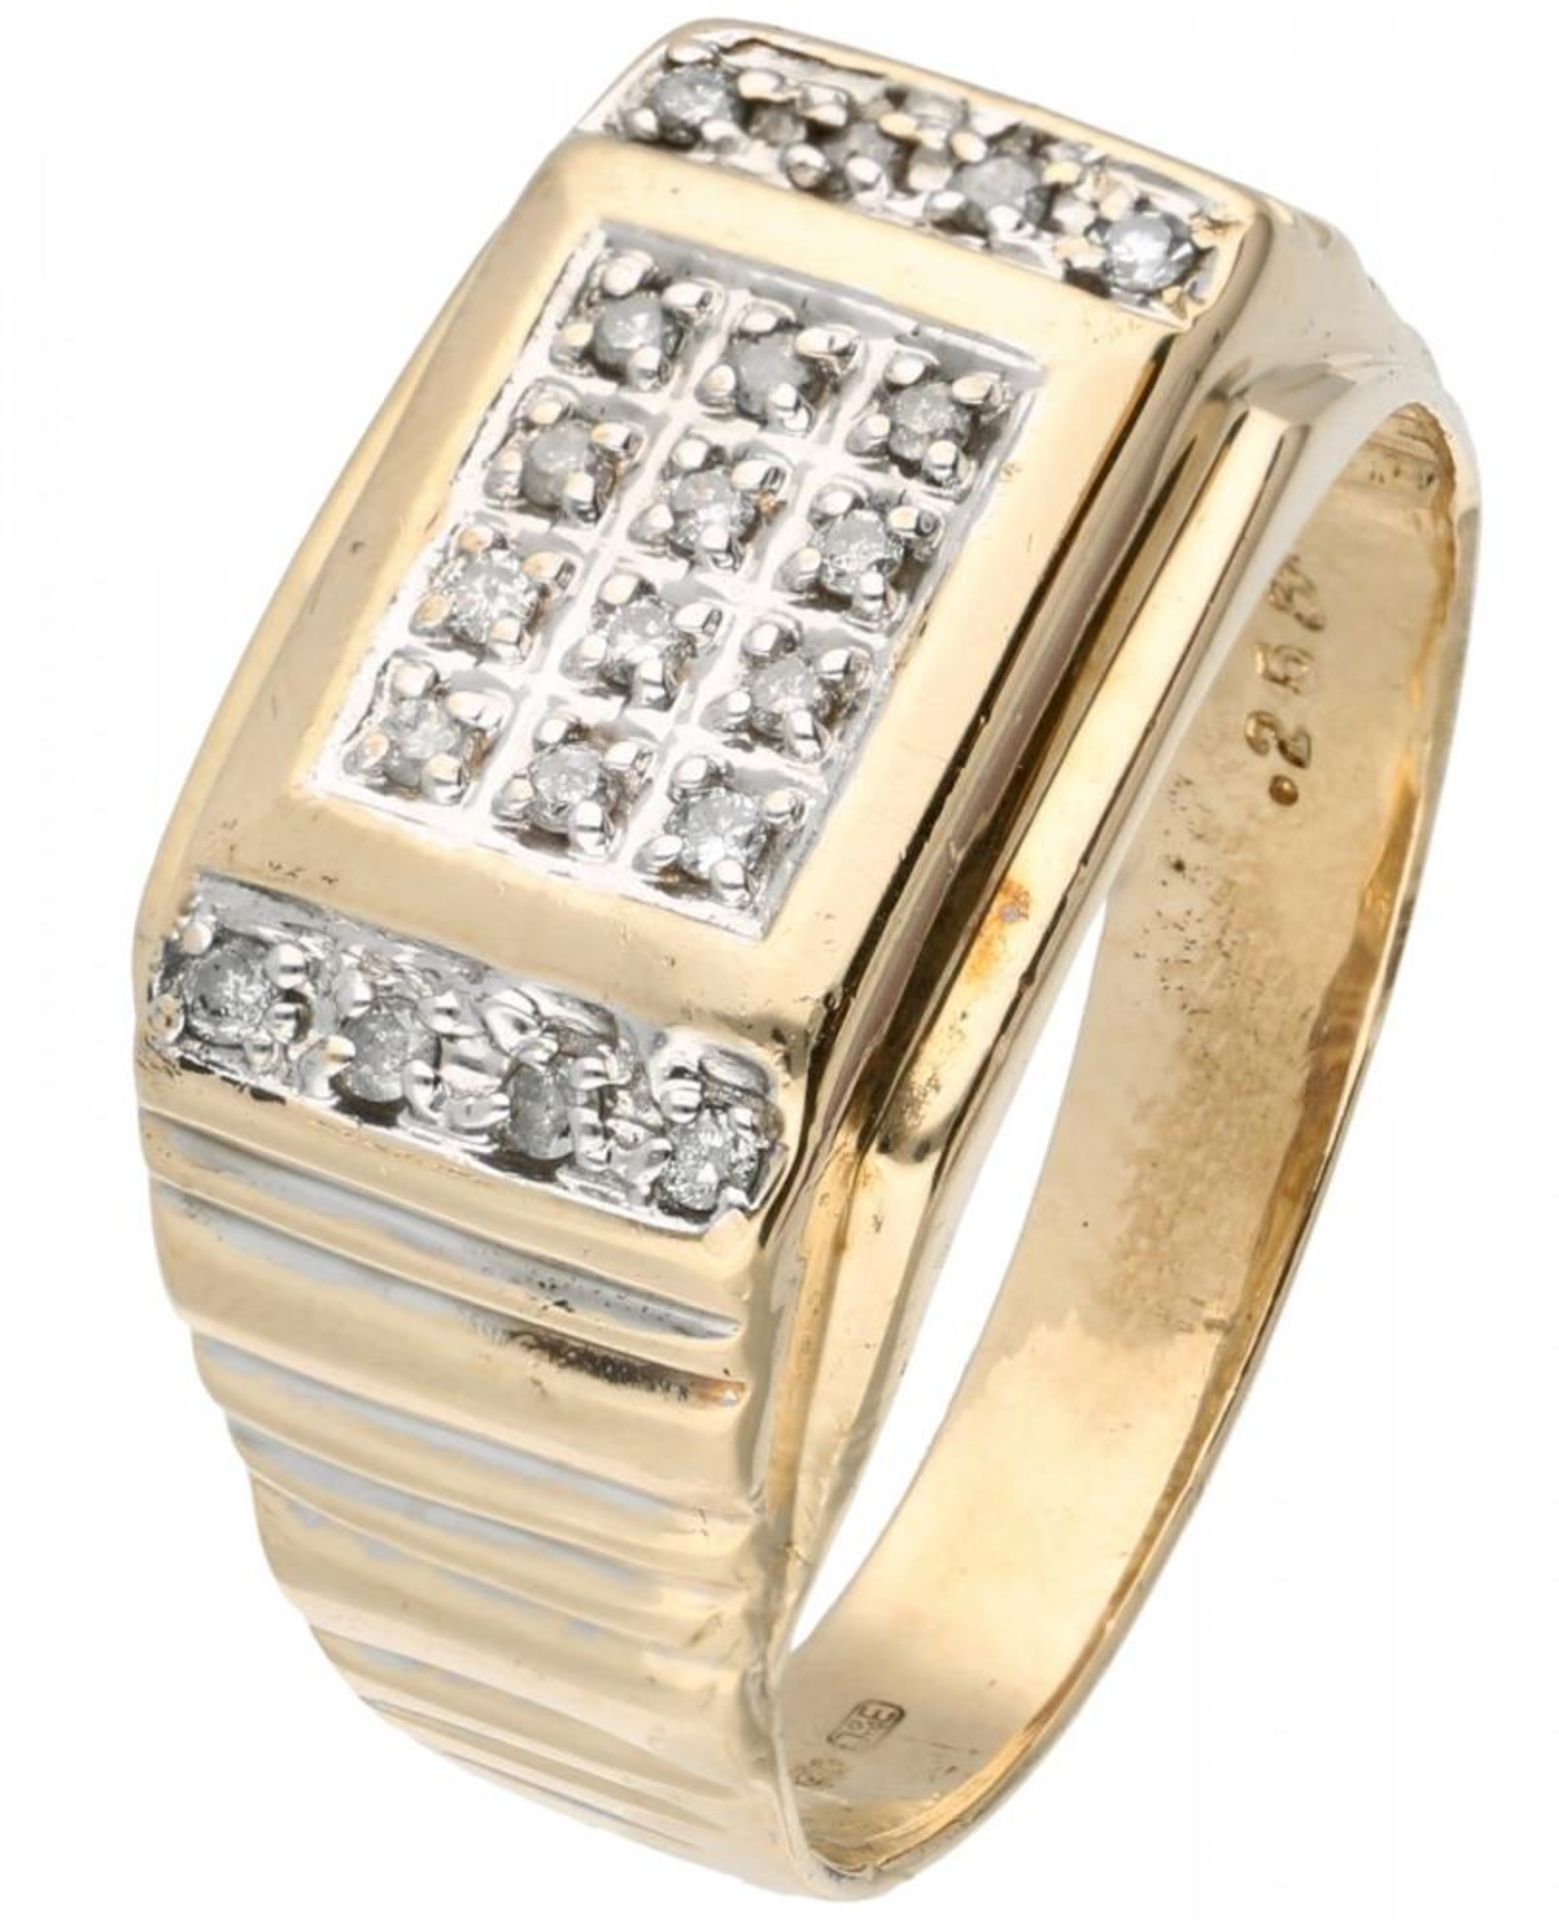 14K. Yellow gold signet ring set with approx. 0.20 ct. diamond.